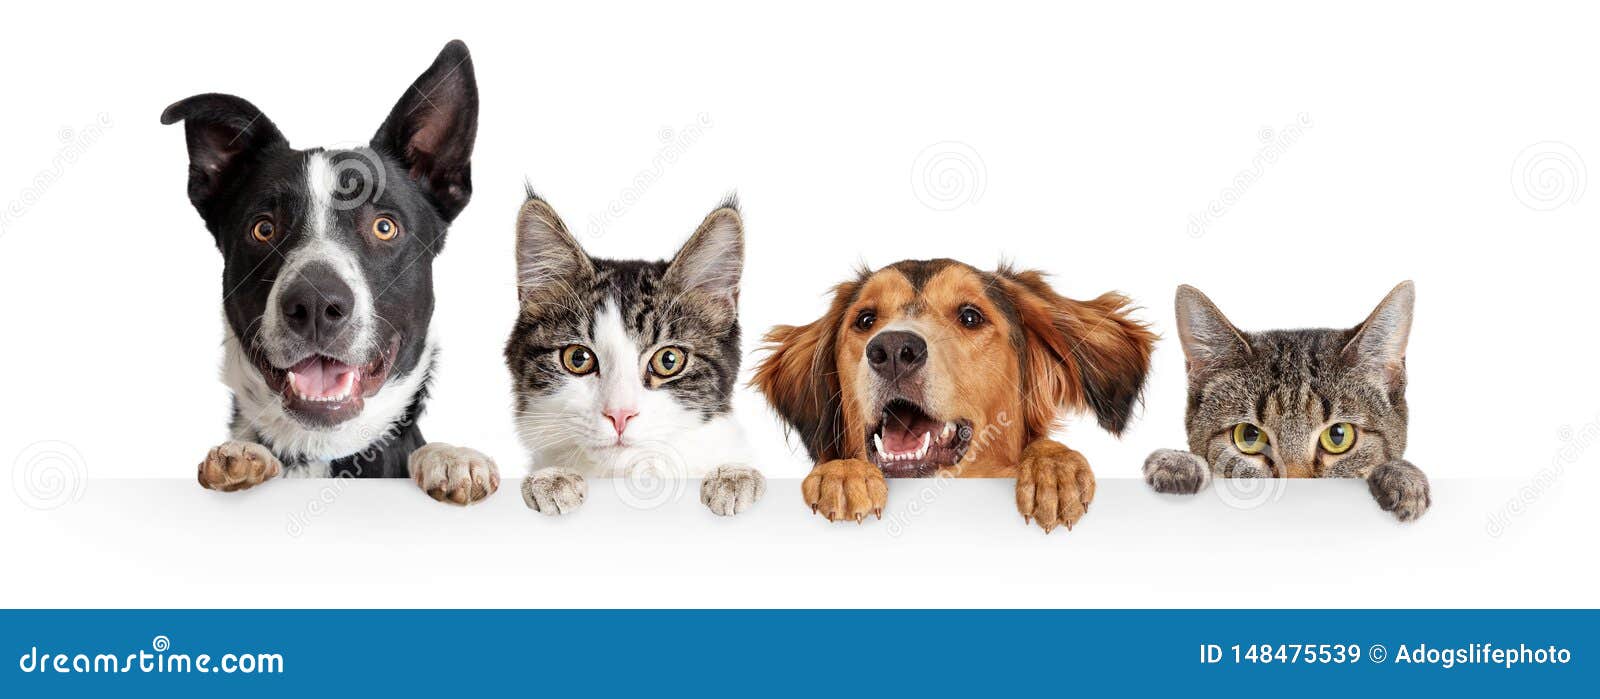 cats and dogs peeking over white web banner